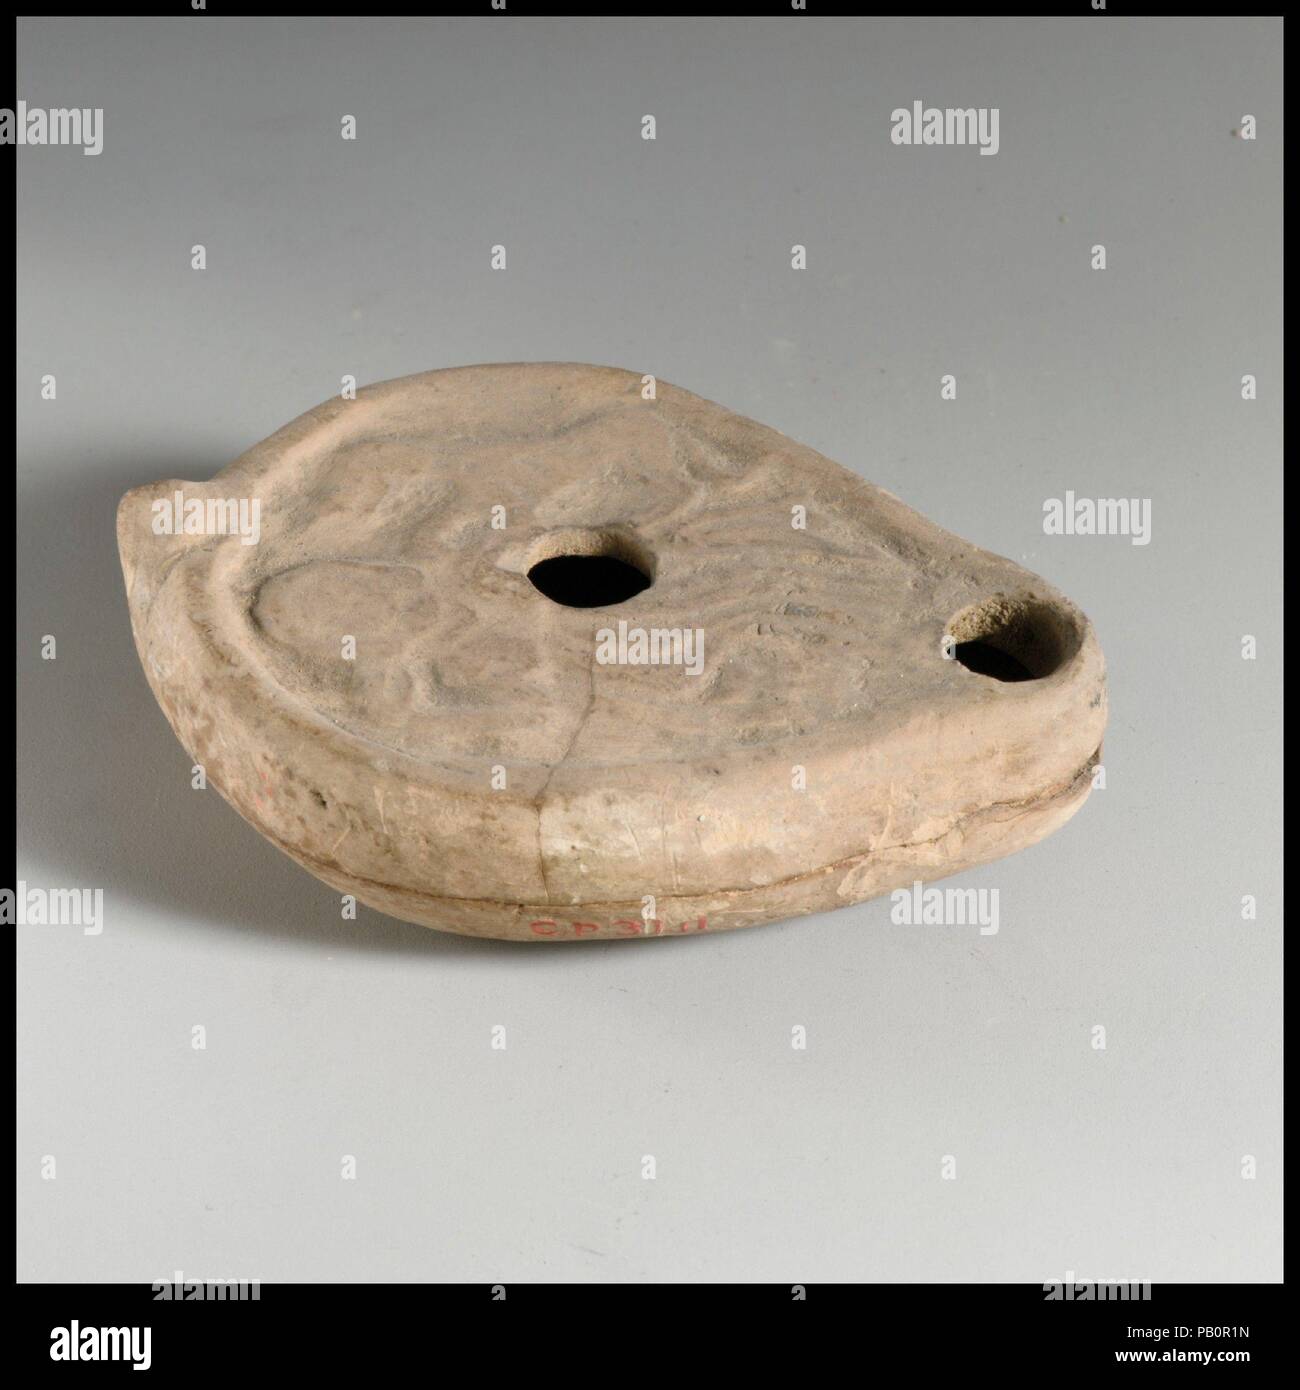 Terracotta oil lamp. Culture: Roman. Dimensions: Overall: 1 x 3 1/4 in. (2.5 x 8.3 cm). Date: 3rd century A.D.. Museum: Metropolitan Museum of Art, New York, USA. Stock Photo